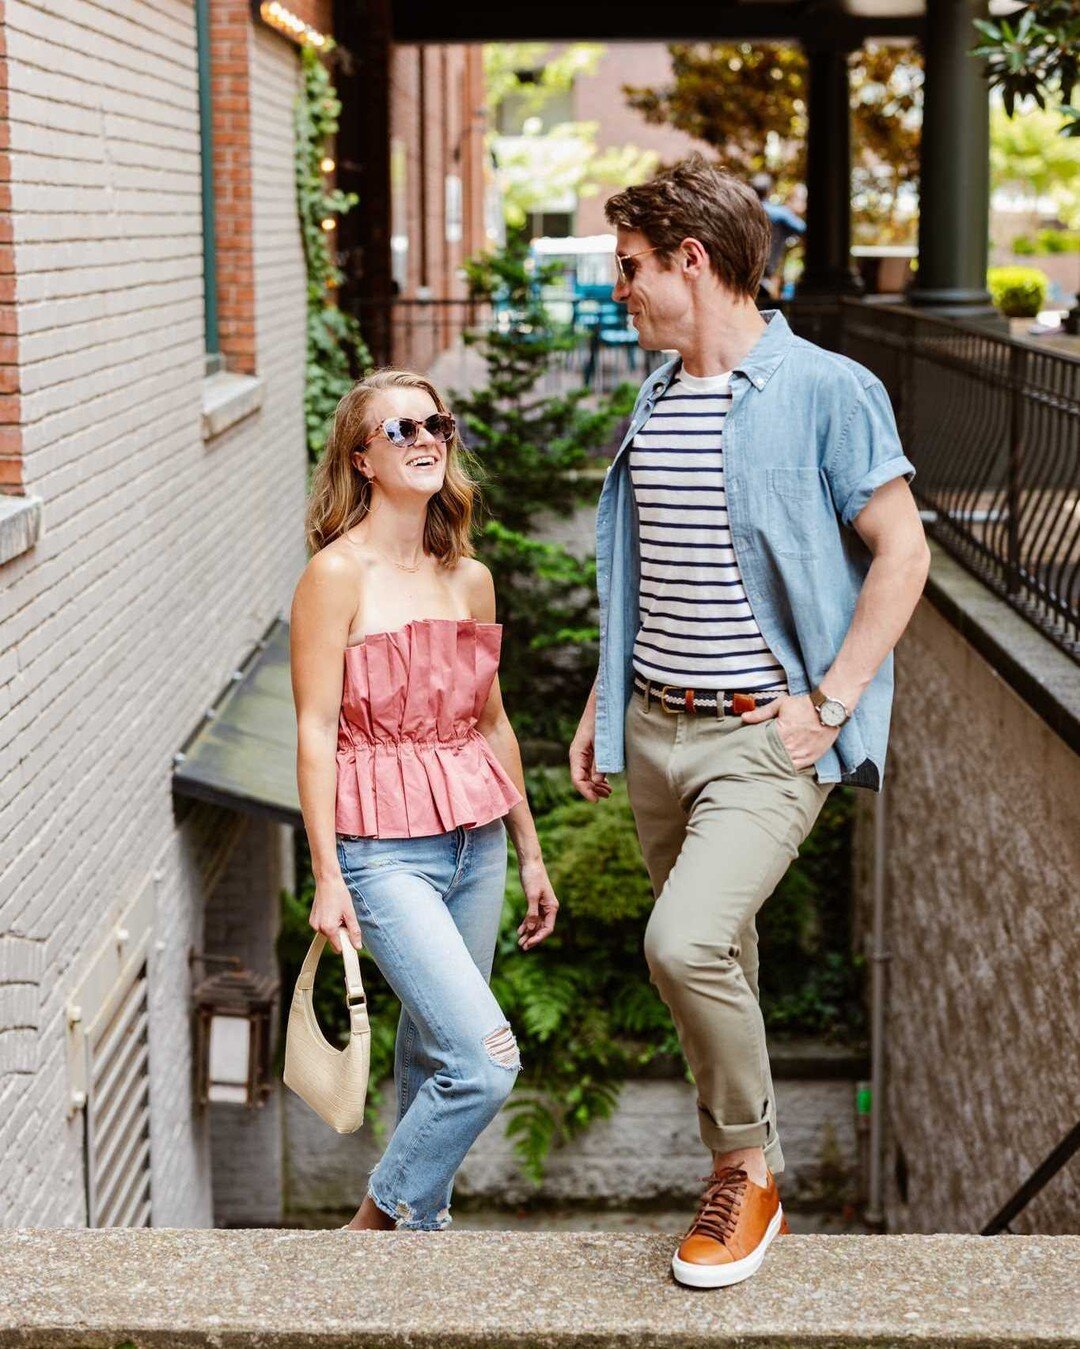 Date Night Here ➡️ There's a lot to think about when planning a first date. The last thing you need to worry about is what to wear.

Whether it's your first date or your fiftieth, Warehouse Row has you covered. With eight different clothing/accessori